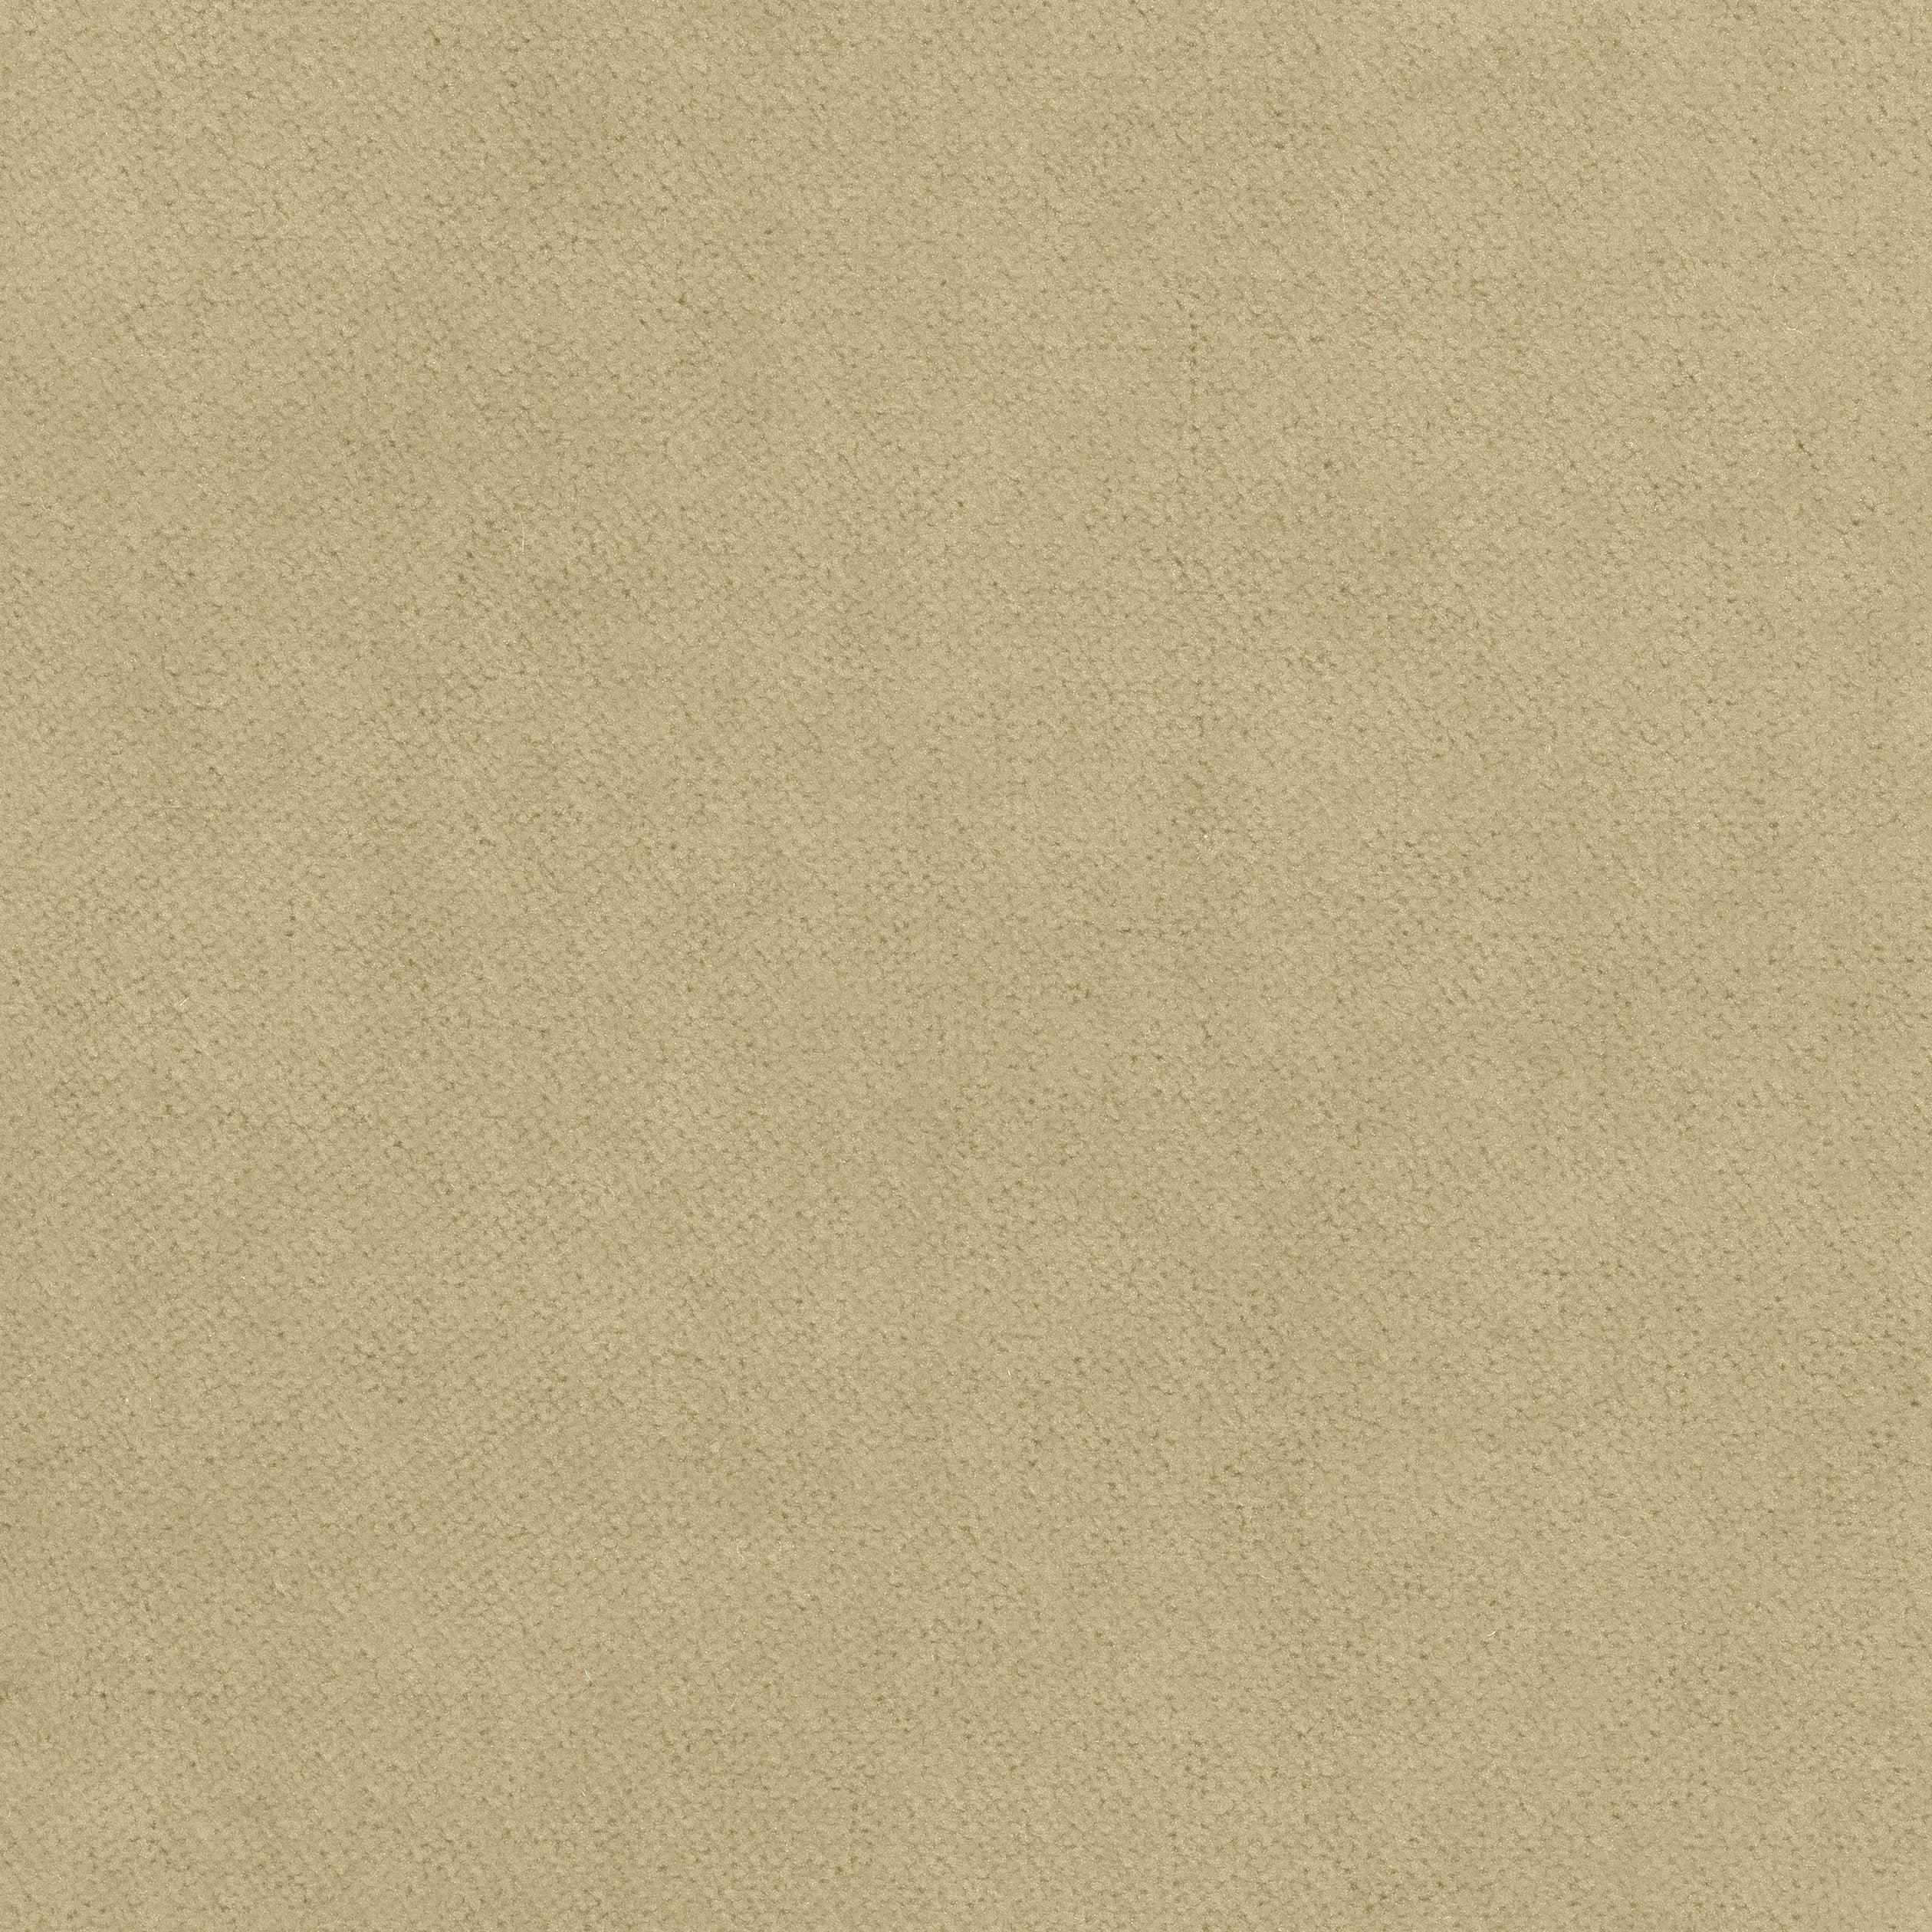 Club Velvet fabric in fawn color - pattern number W7223 - by Thibaut in the Club Velvet collection